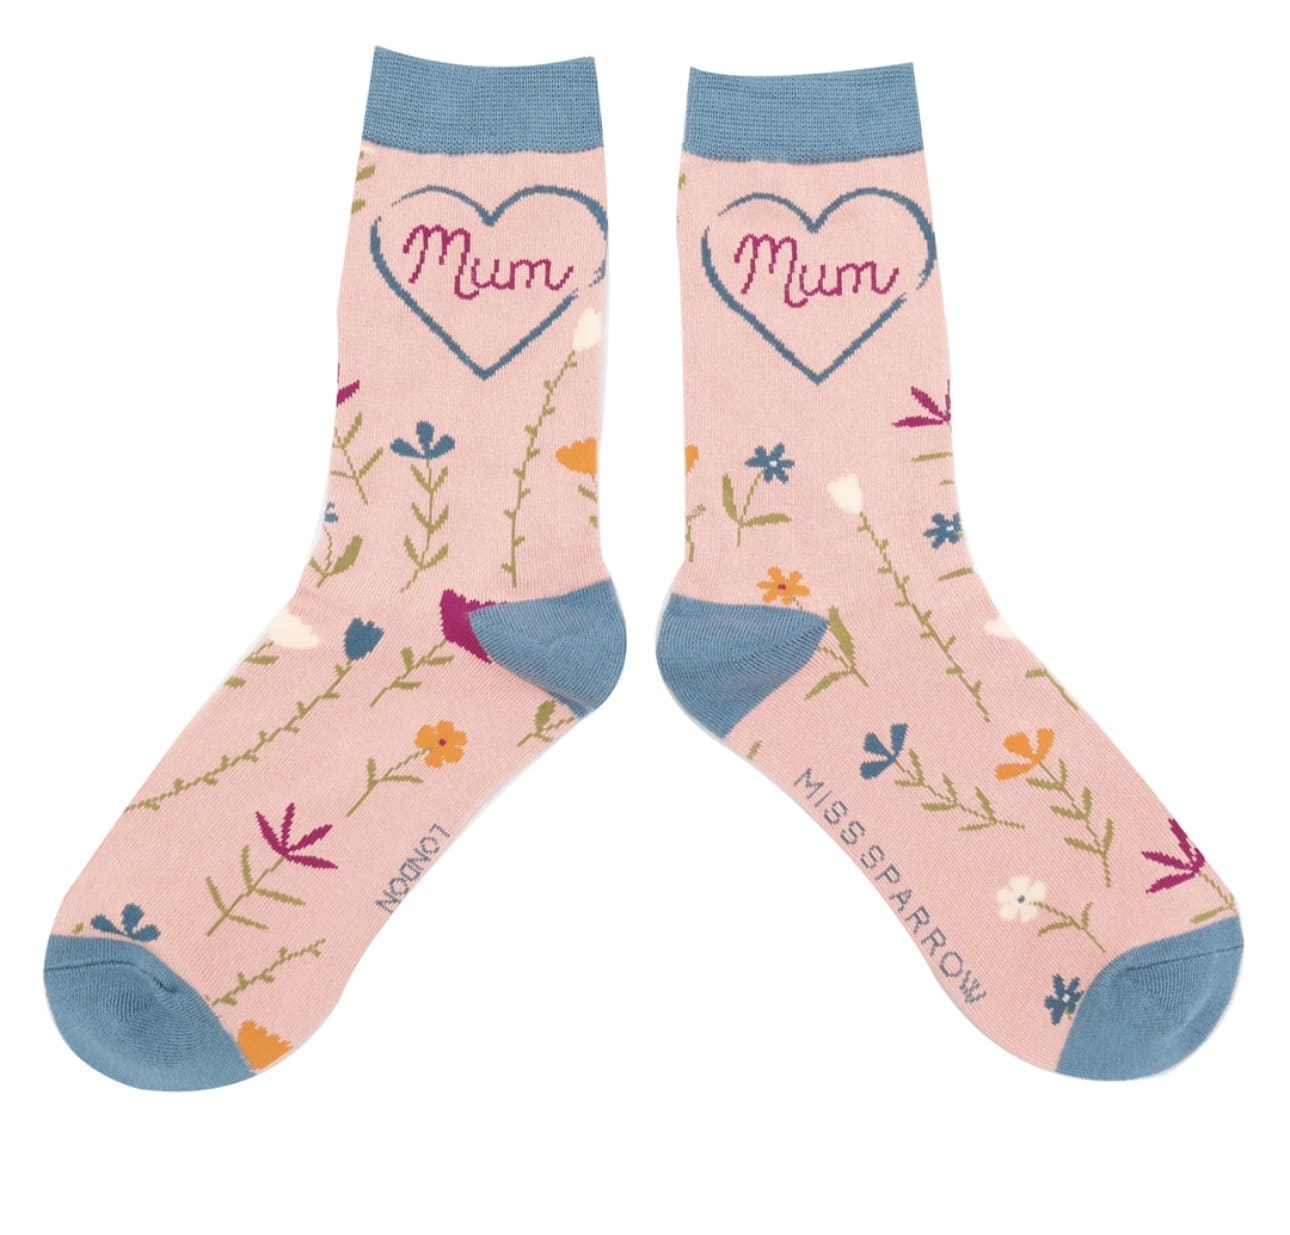 A pair of pink socks with the word mum on them.